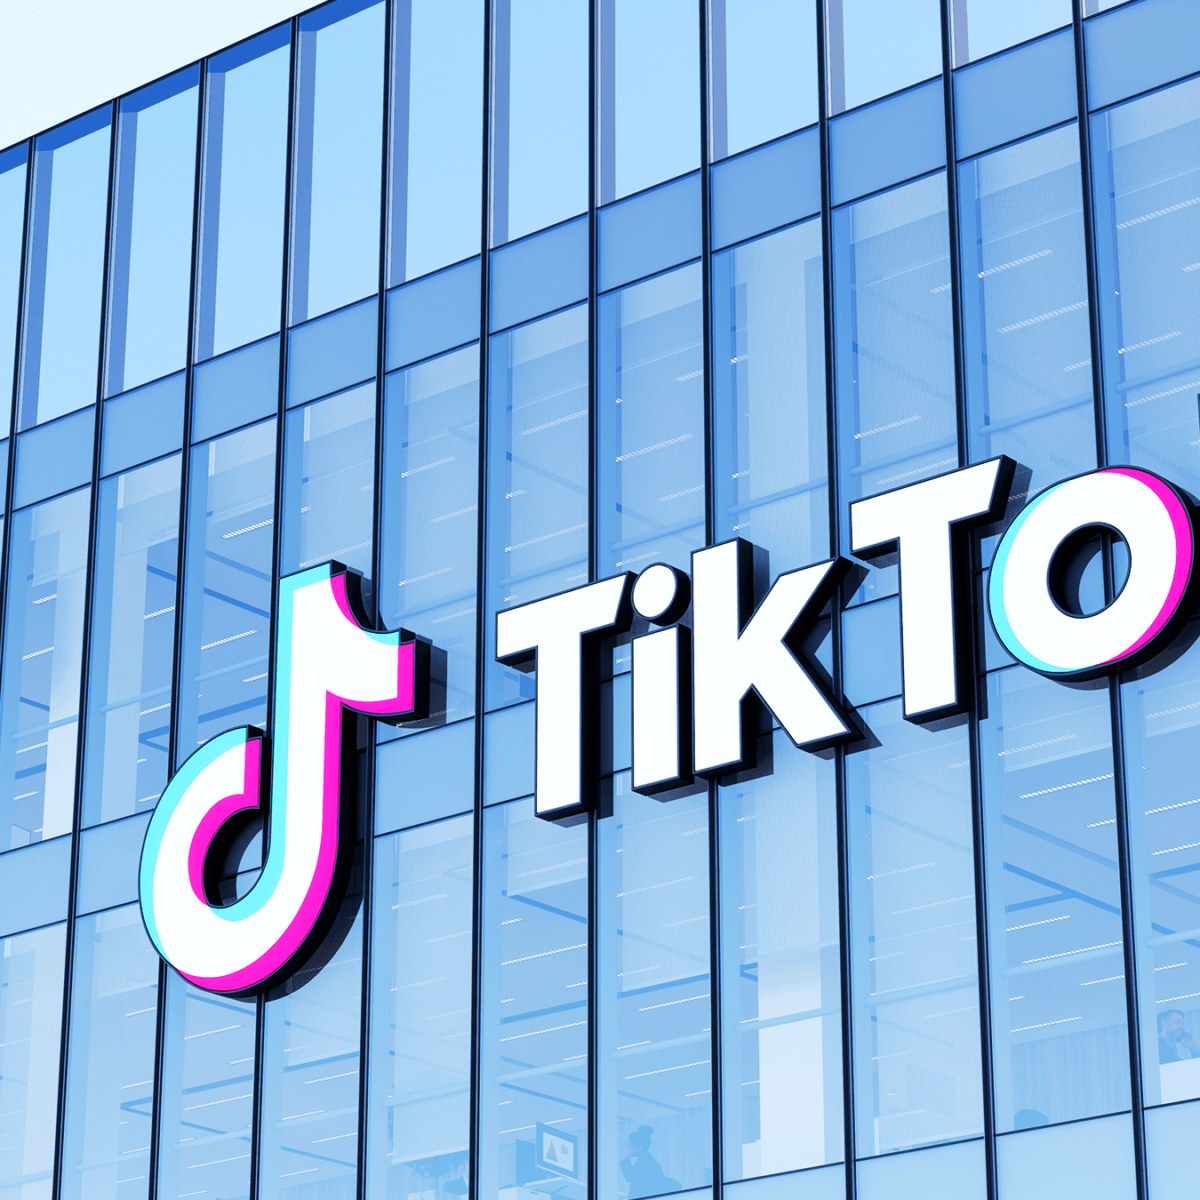 An image of an office building branded with the TikTok logo